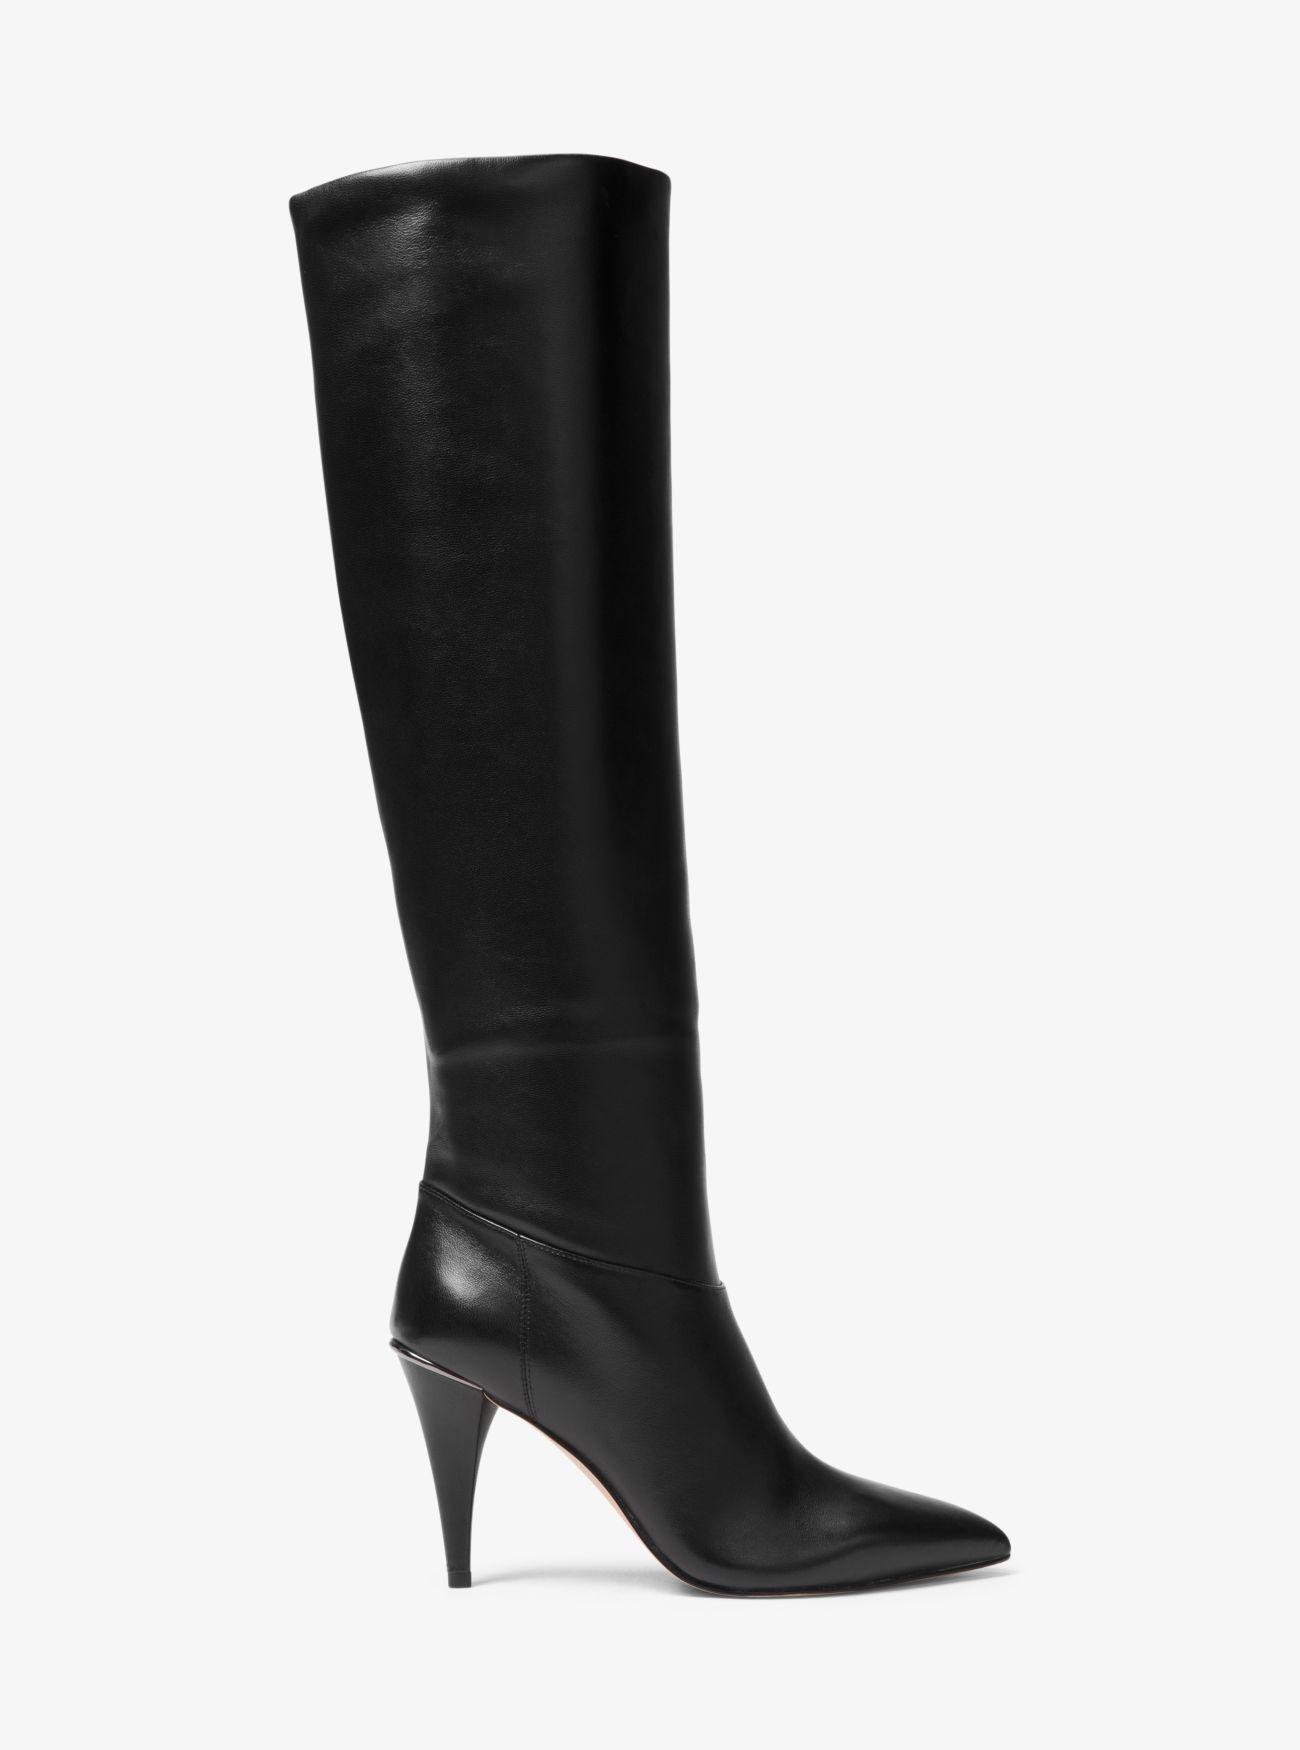 Michael Kors Rosalyn Leather Boot in 